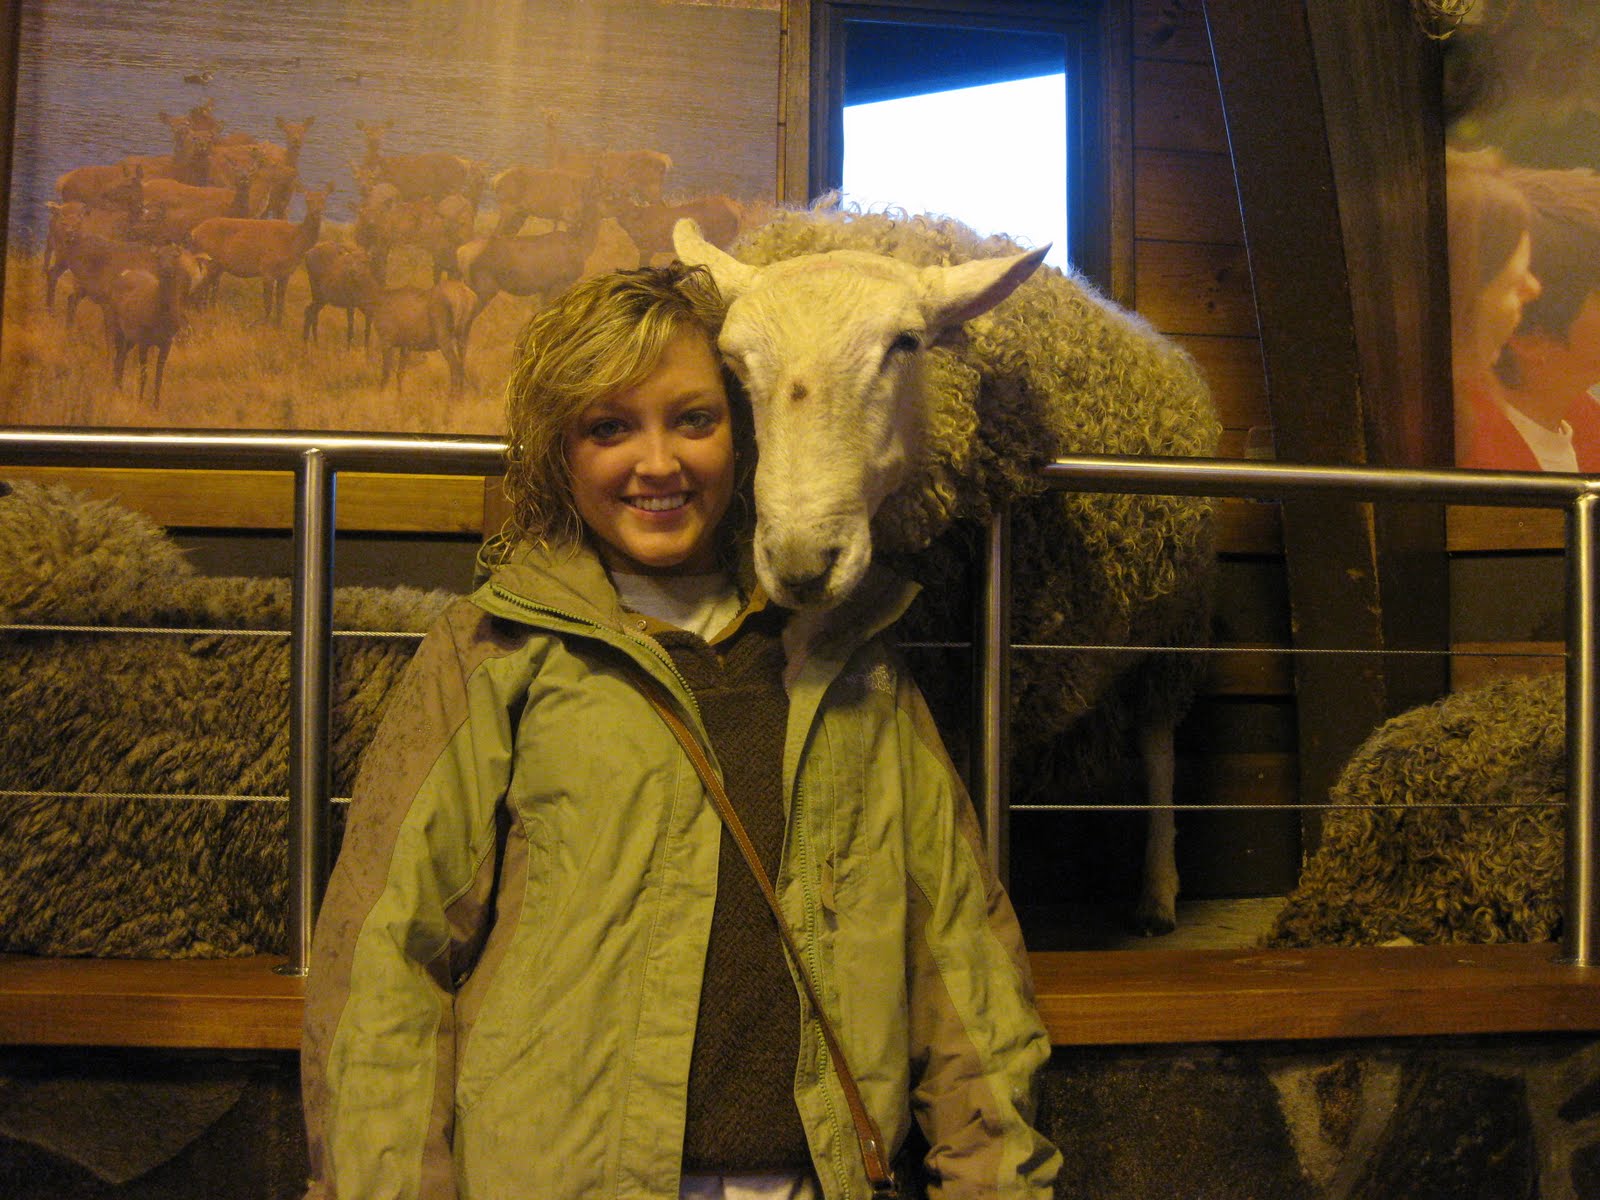 the friendly sheep showing